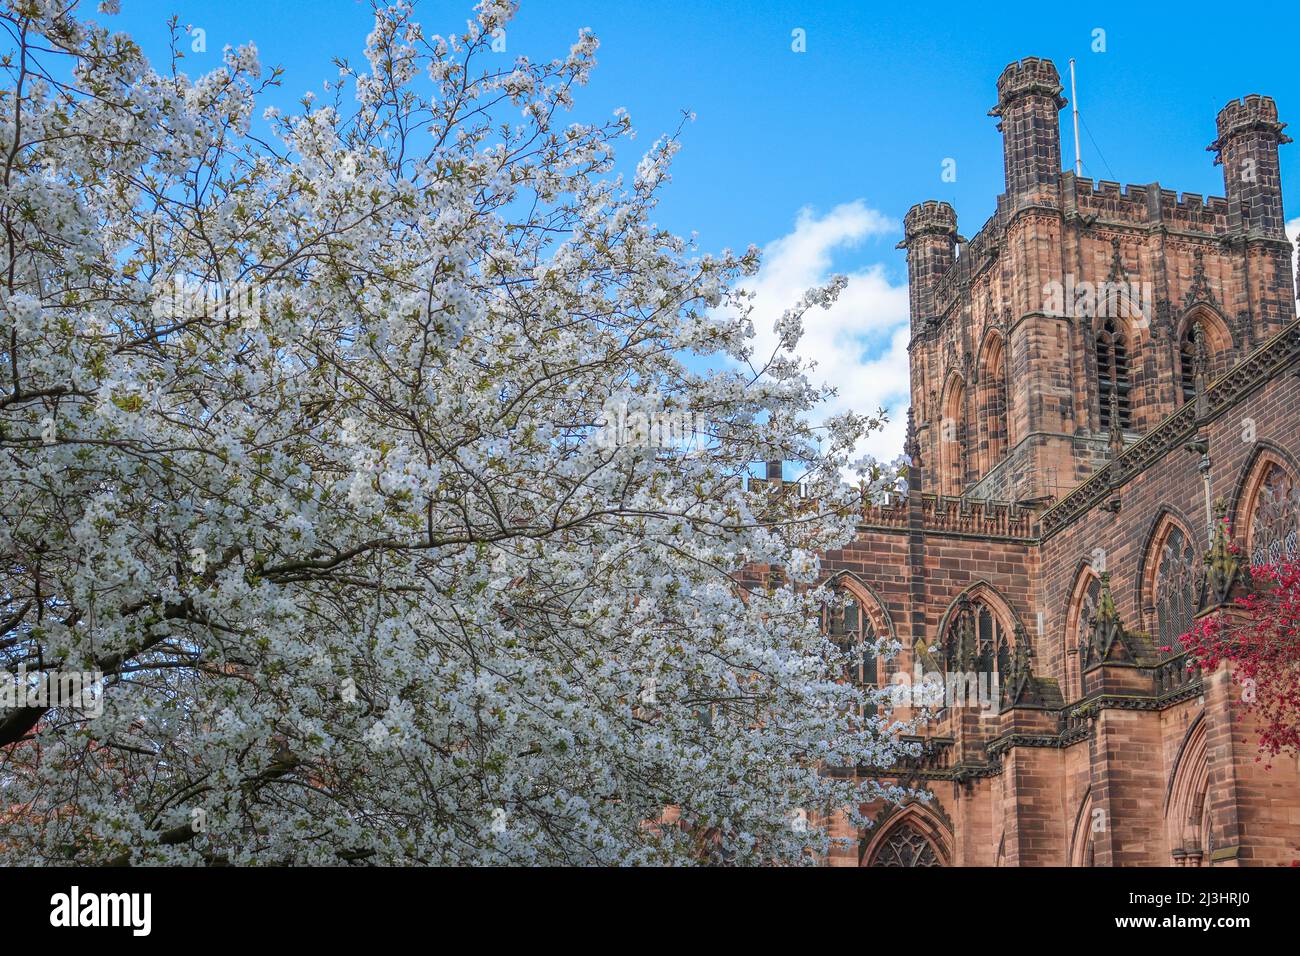 Chester Cathedral in bloom, blue sky and blossom trees Stock Photo